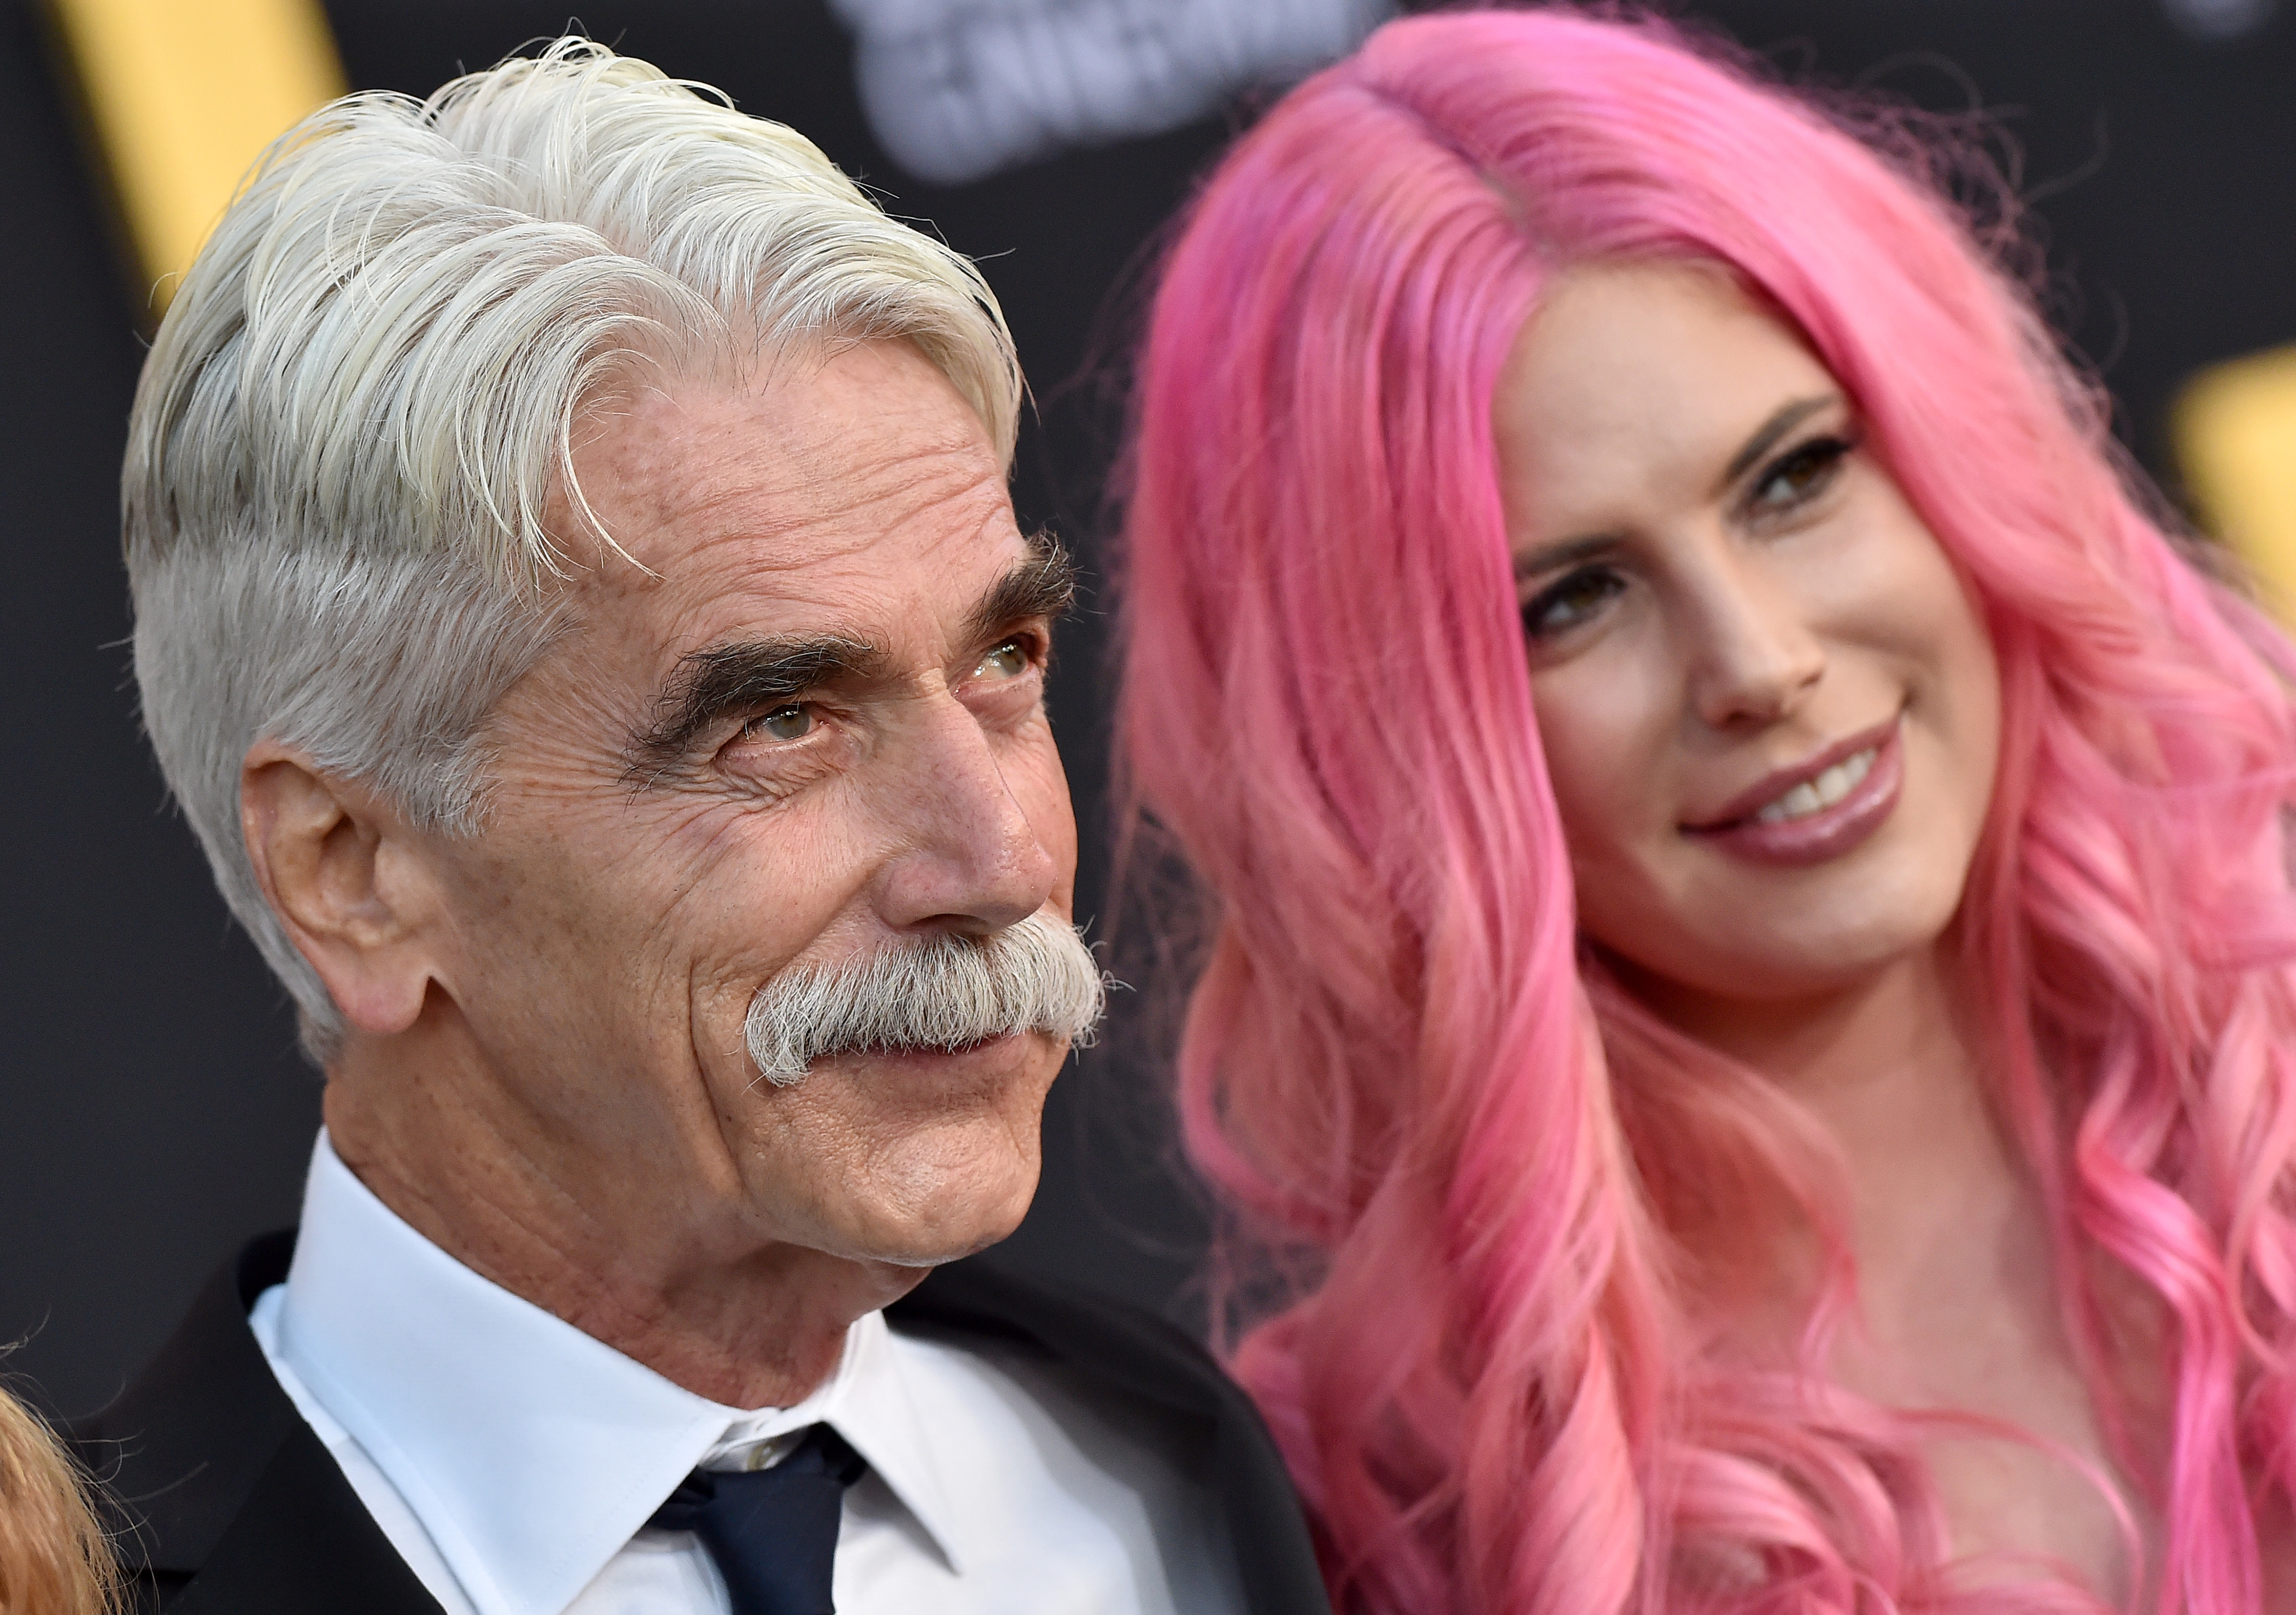 Sam Elliott and his daughter Cleo at the premiere of "A Star Is Born" in California in 2018 | Source: Getty Images